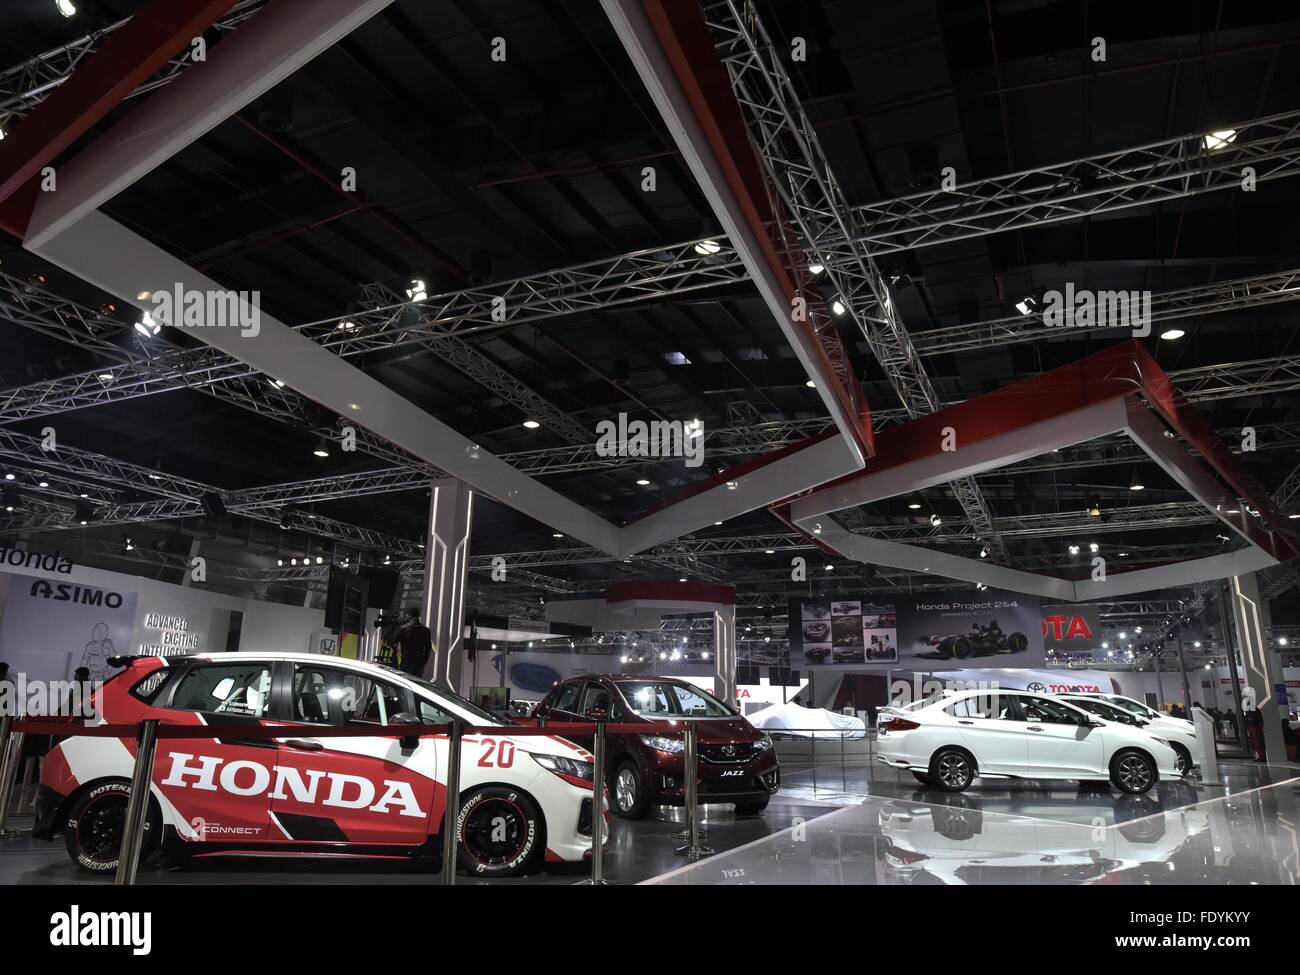 New Delhi. 3rd Feb, 2016. Photo taken on Feb. 3, 2016 shows the exhibition pavilion on the first media day of 2016 Auto Expo in Greater Noida, Delhi NCR, India. The biennial expo kicked off toward media Wednesday and will be open to the public on Friday. Around 80 new vehicles are expected to be debuted during this exhibition. © Bi Xiaoyang/Xinhua/Alamy Live News Stock Photo